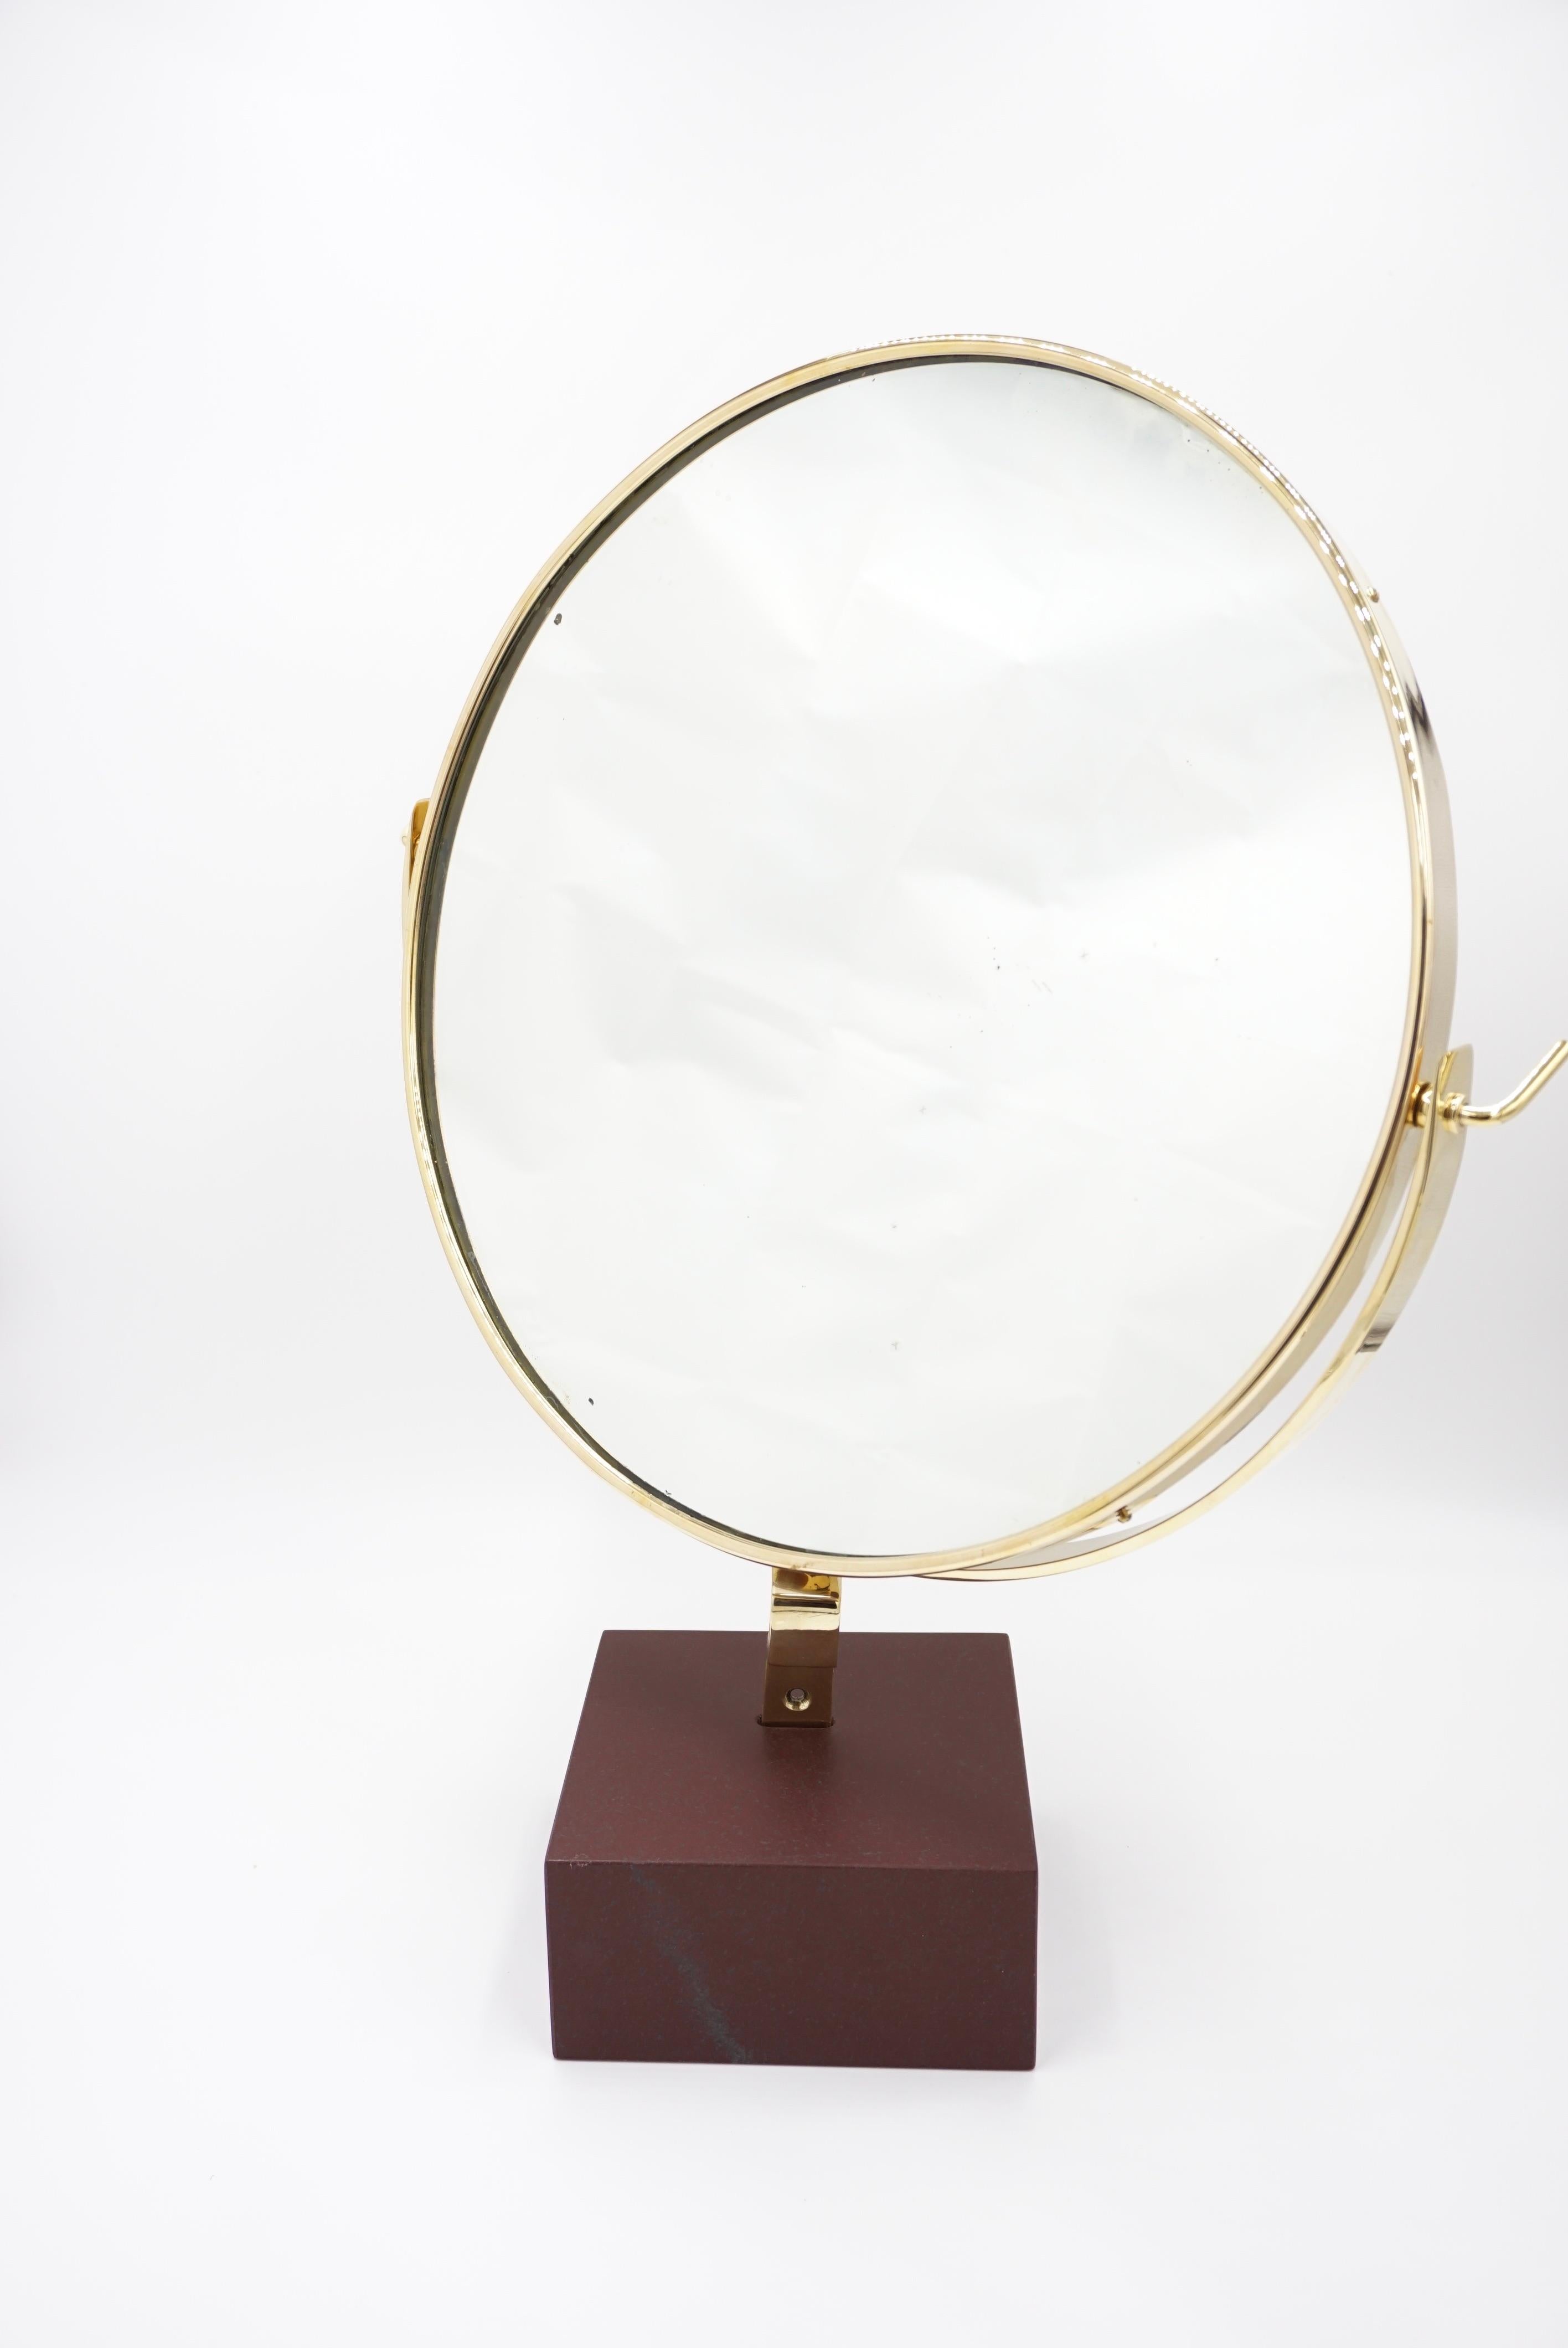 Vanity mirror designed by Gio Ponti for the vanity of Hotel Royal, Napoli, 1955 and produced by Fontana Arte in 1955. 
Limited edition
Original piece ( in one desk from the furniture of Hotel Royal) customized by CG with marble support in 2021.